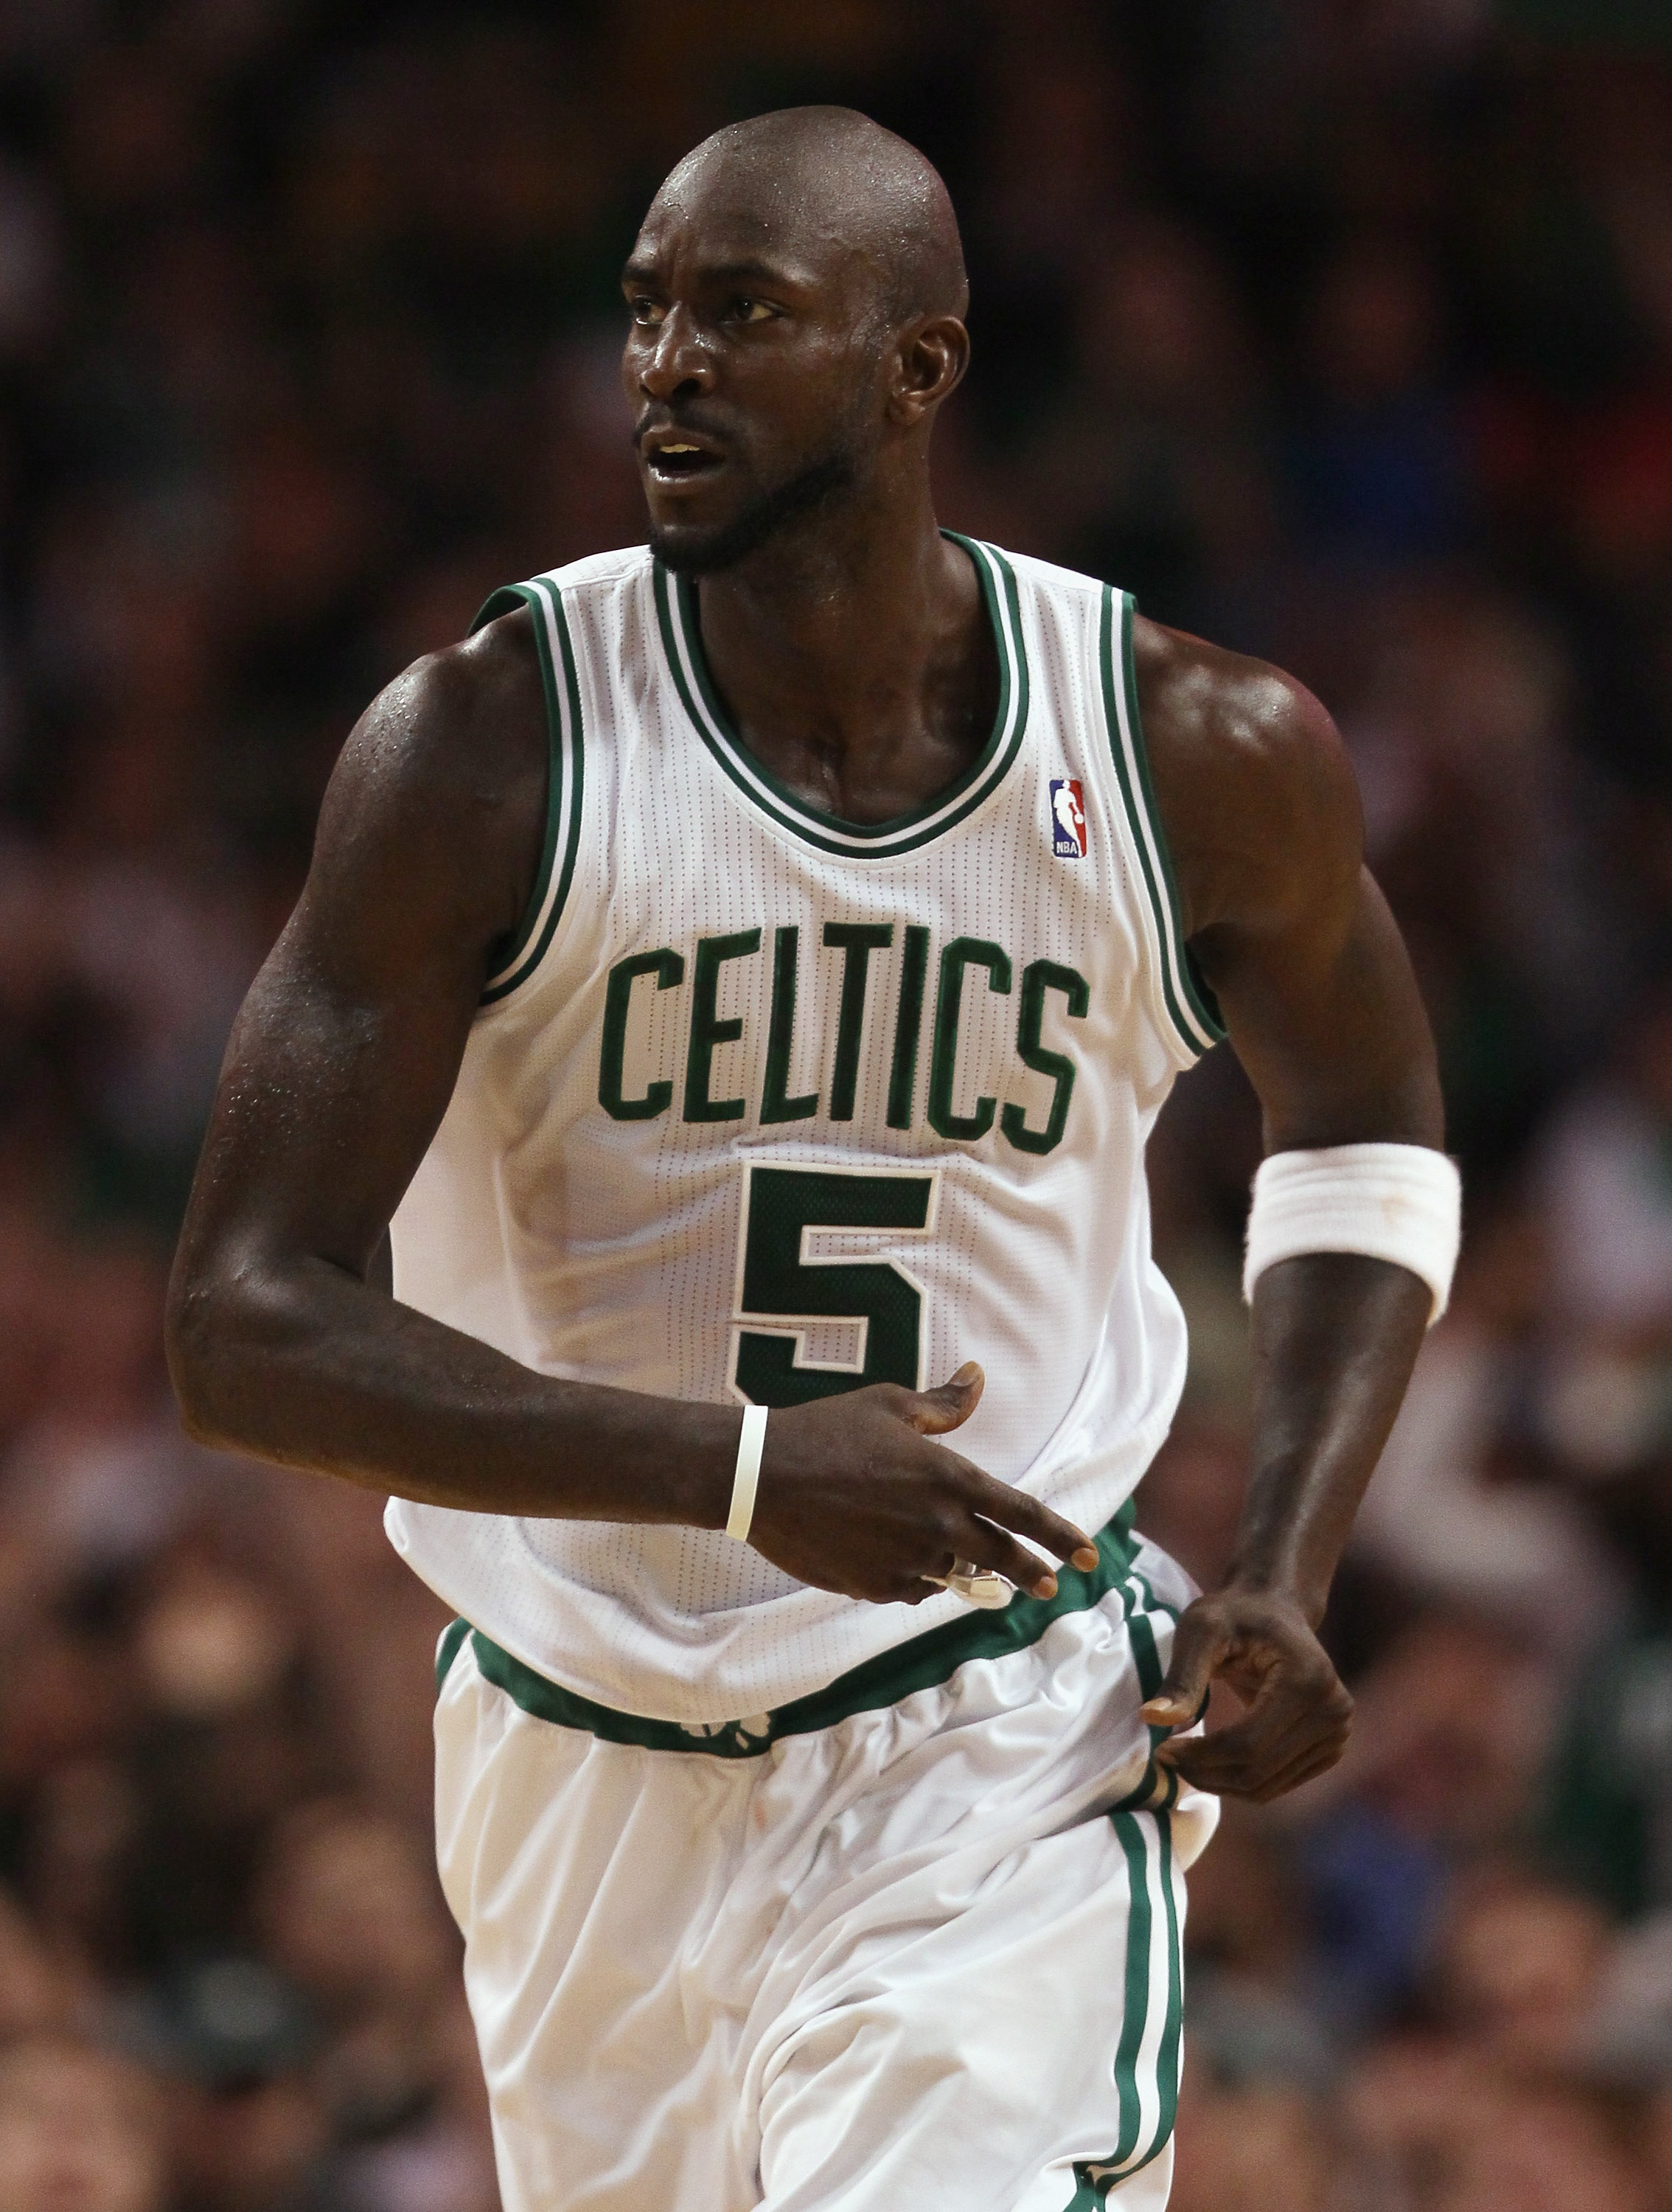 BOSTON - DECEMBER 01:  Kevin Garnett #5 of the Boston Celtics reacts after his basket in fourth quarter against the Portland Trailblazers on December 1, 2010 at the TD Garden in Boston, Massachusetts. The Celtics defeated the Trailblazers 99-95. NOTE TO U